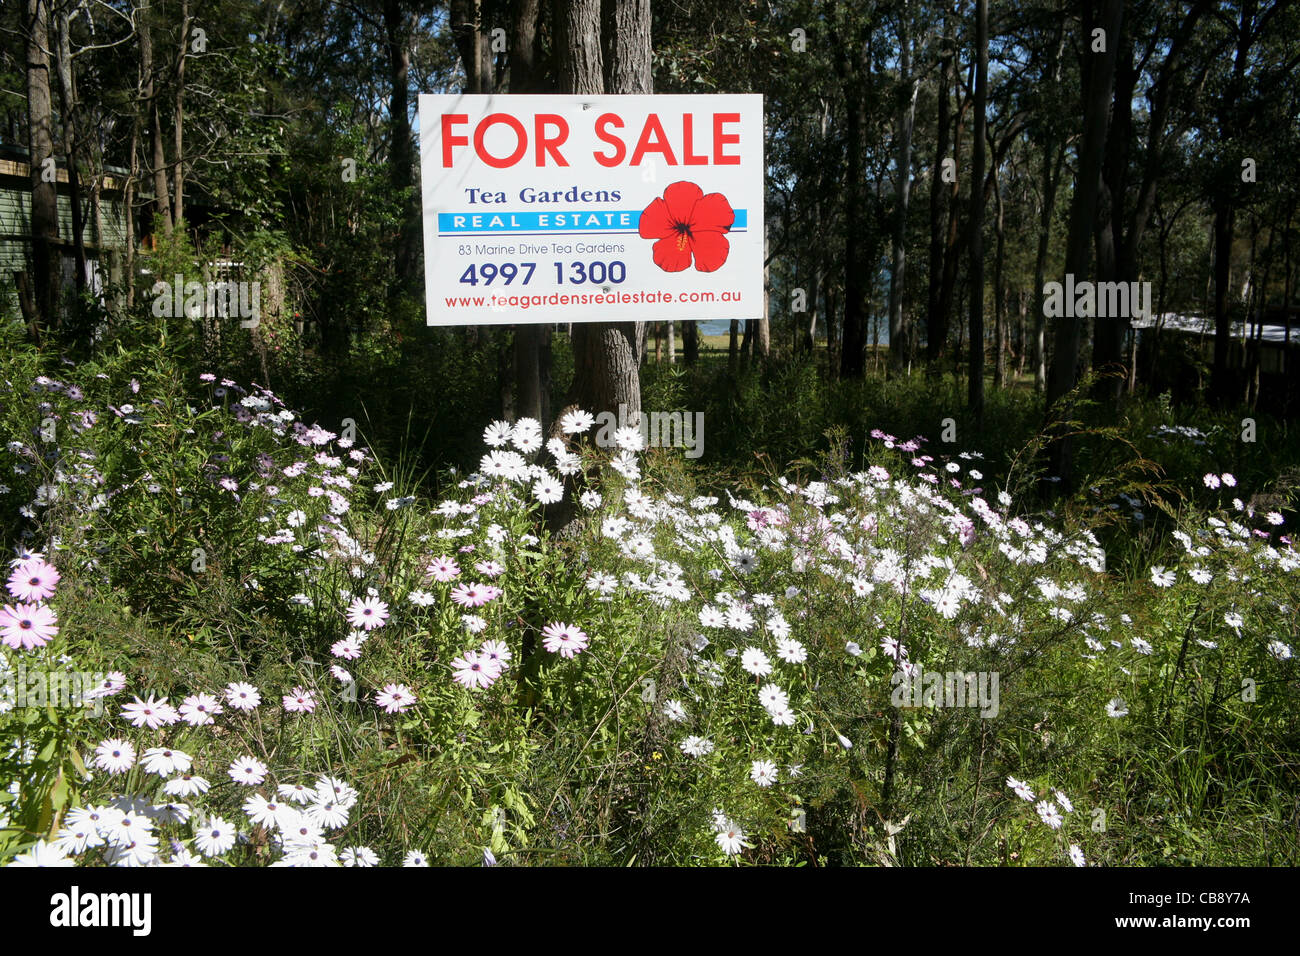 For Sale sign on a block of land with spring flowers, Tea Gardens, NSW Australia Stock Photo